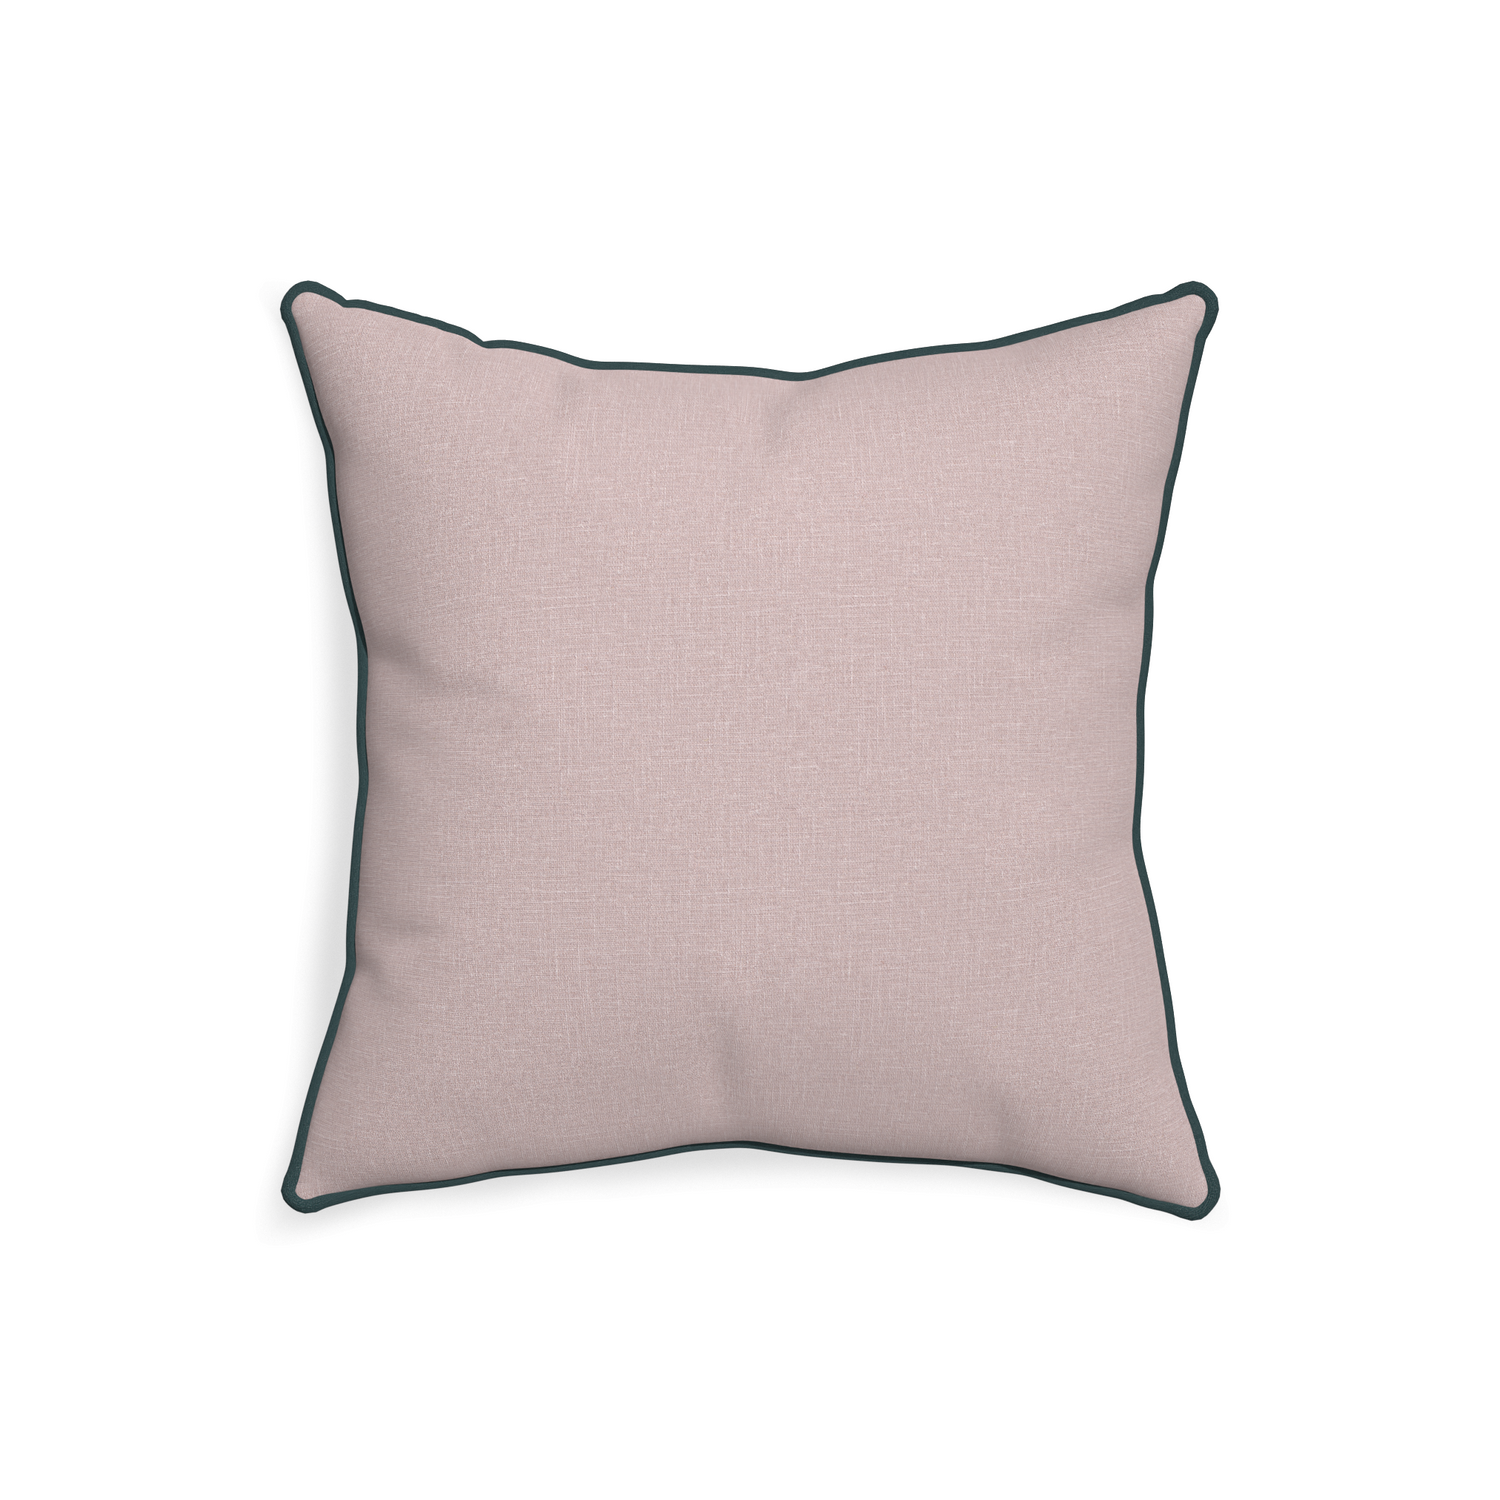 20-square orchid custom mauve pinkpillow with p piping on white background